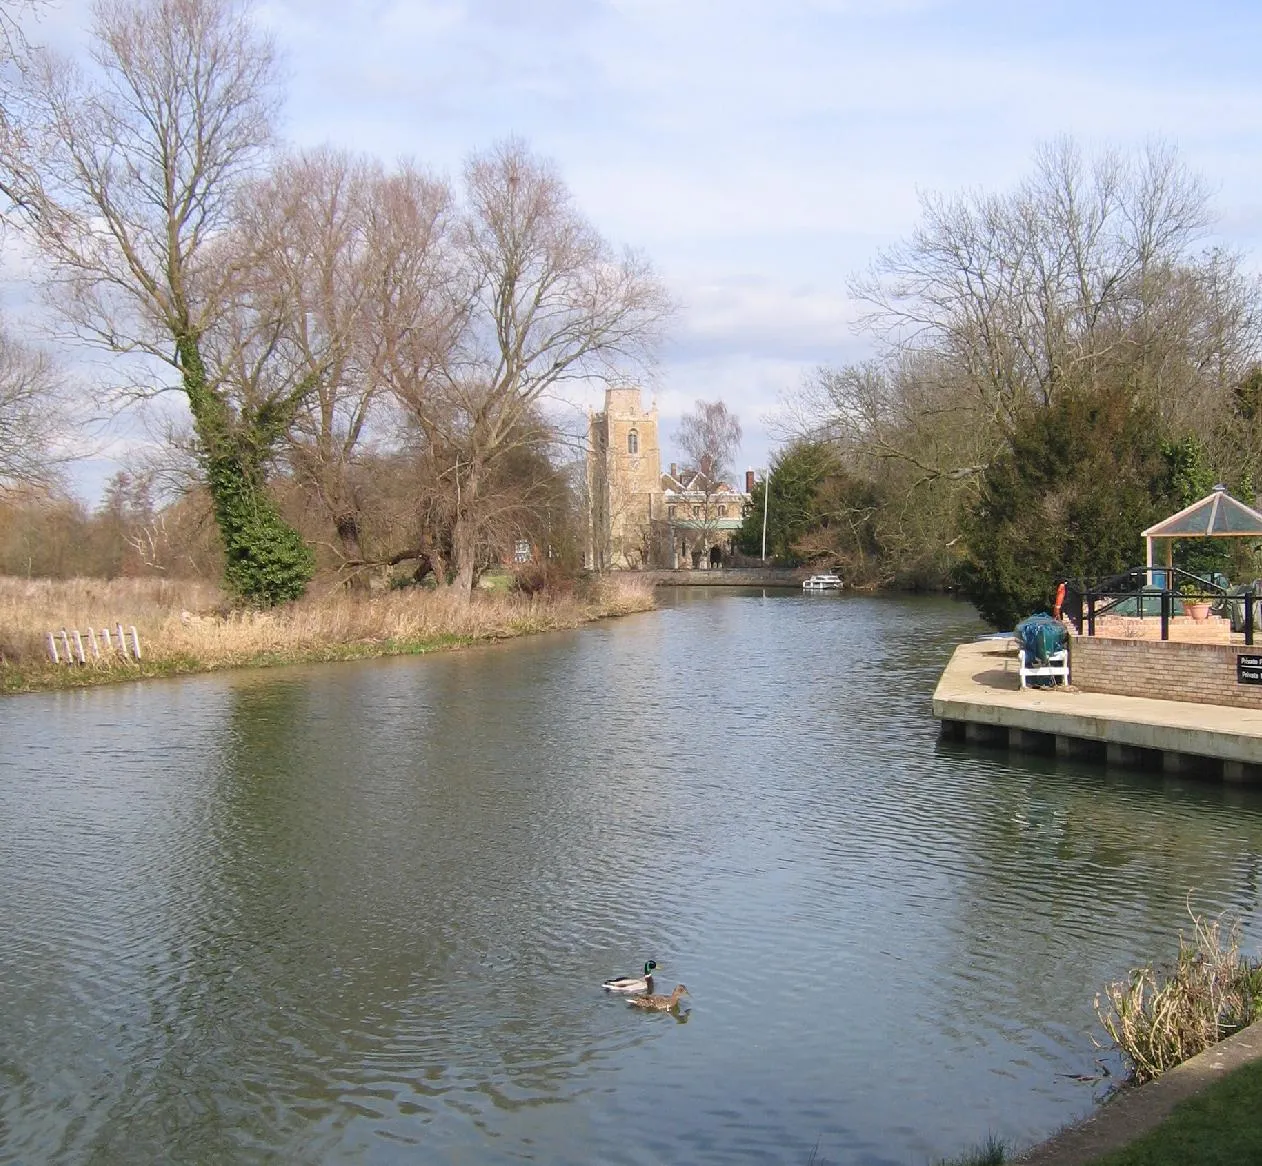 Photo showing: The church of St James, Hemingford Grey, Cambridgeshire, alongside the Great Ouse river.